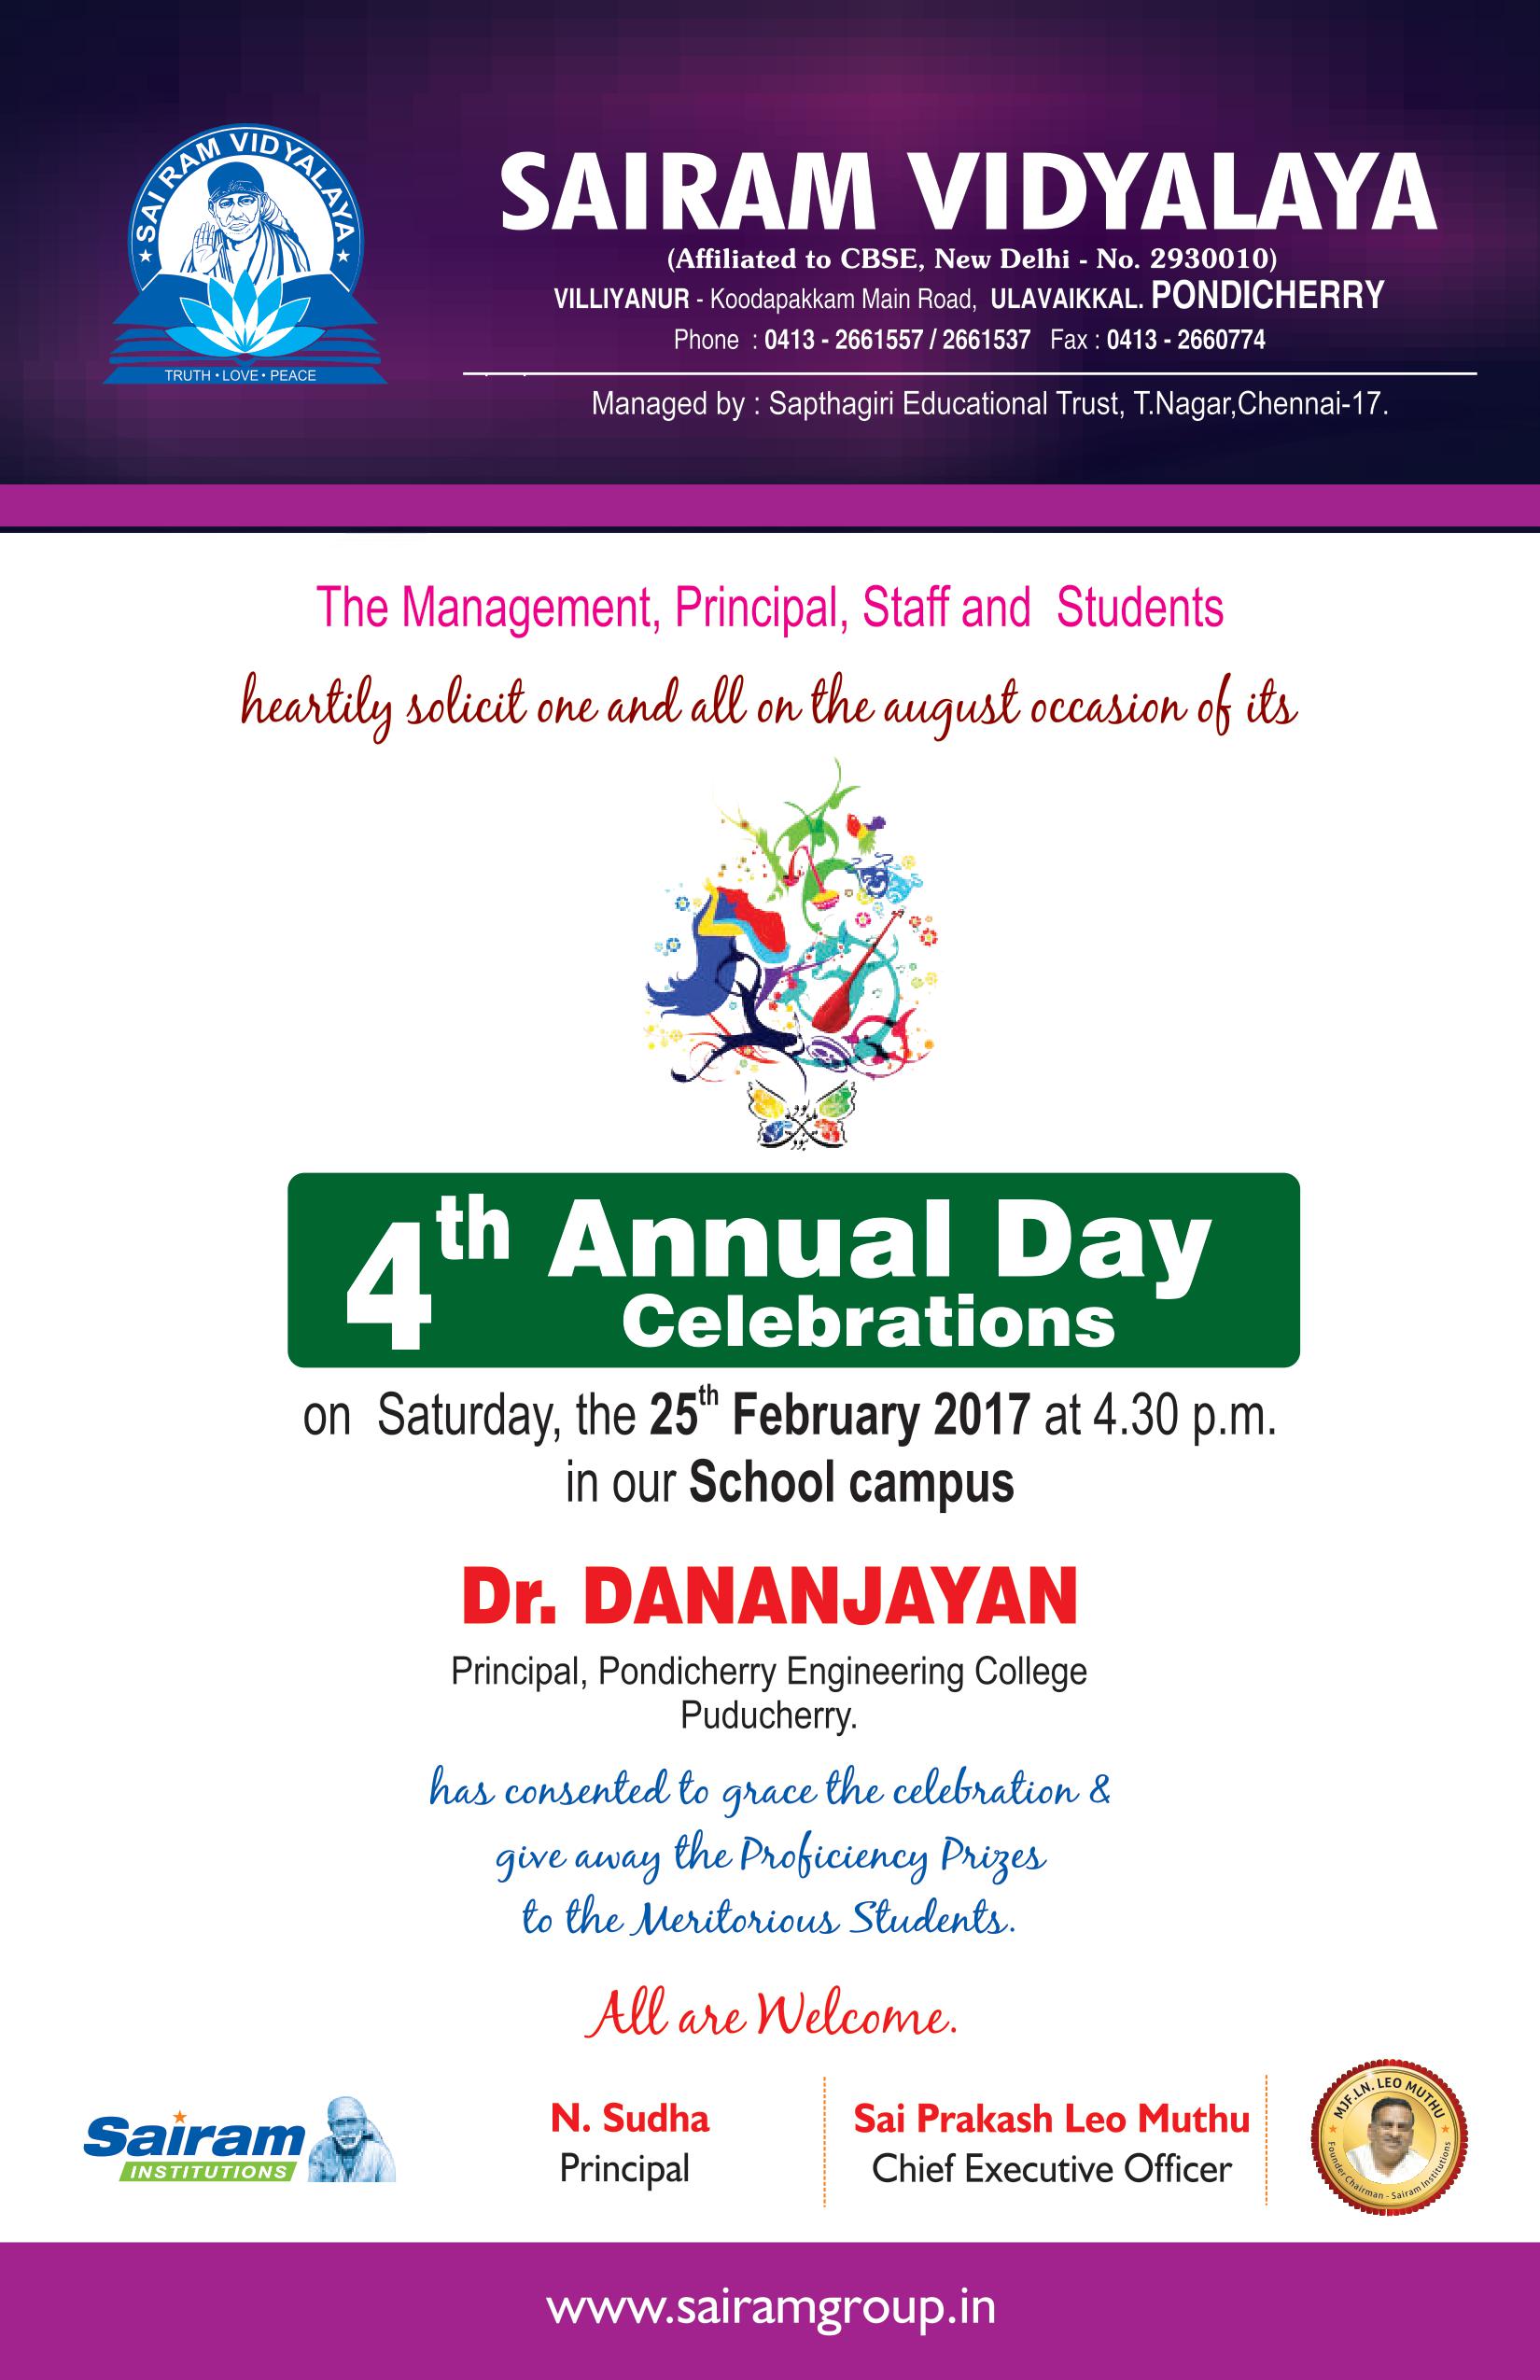 4th Annual day celebration on 25th Feb, 2017 at our school campus